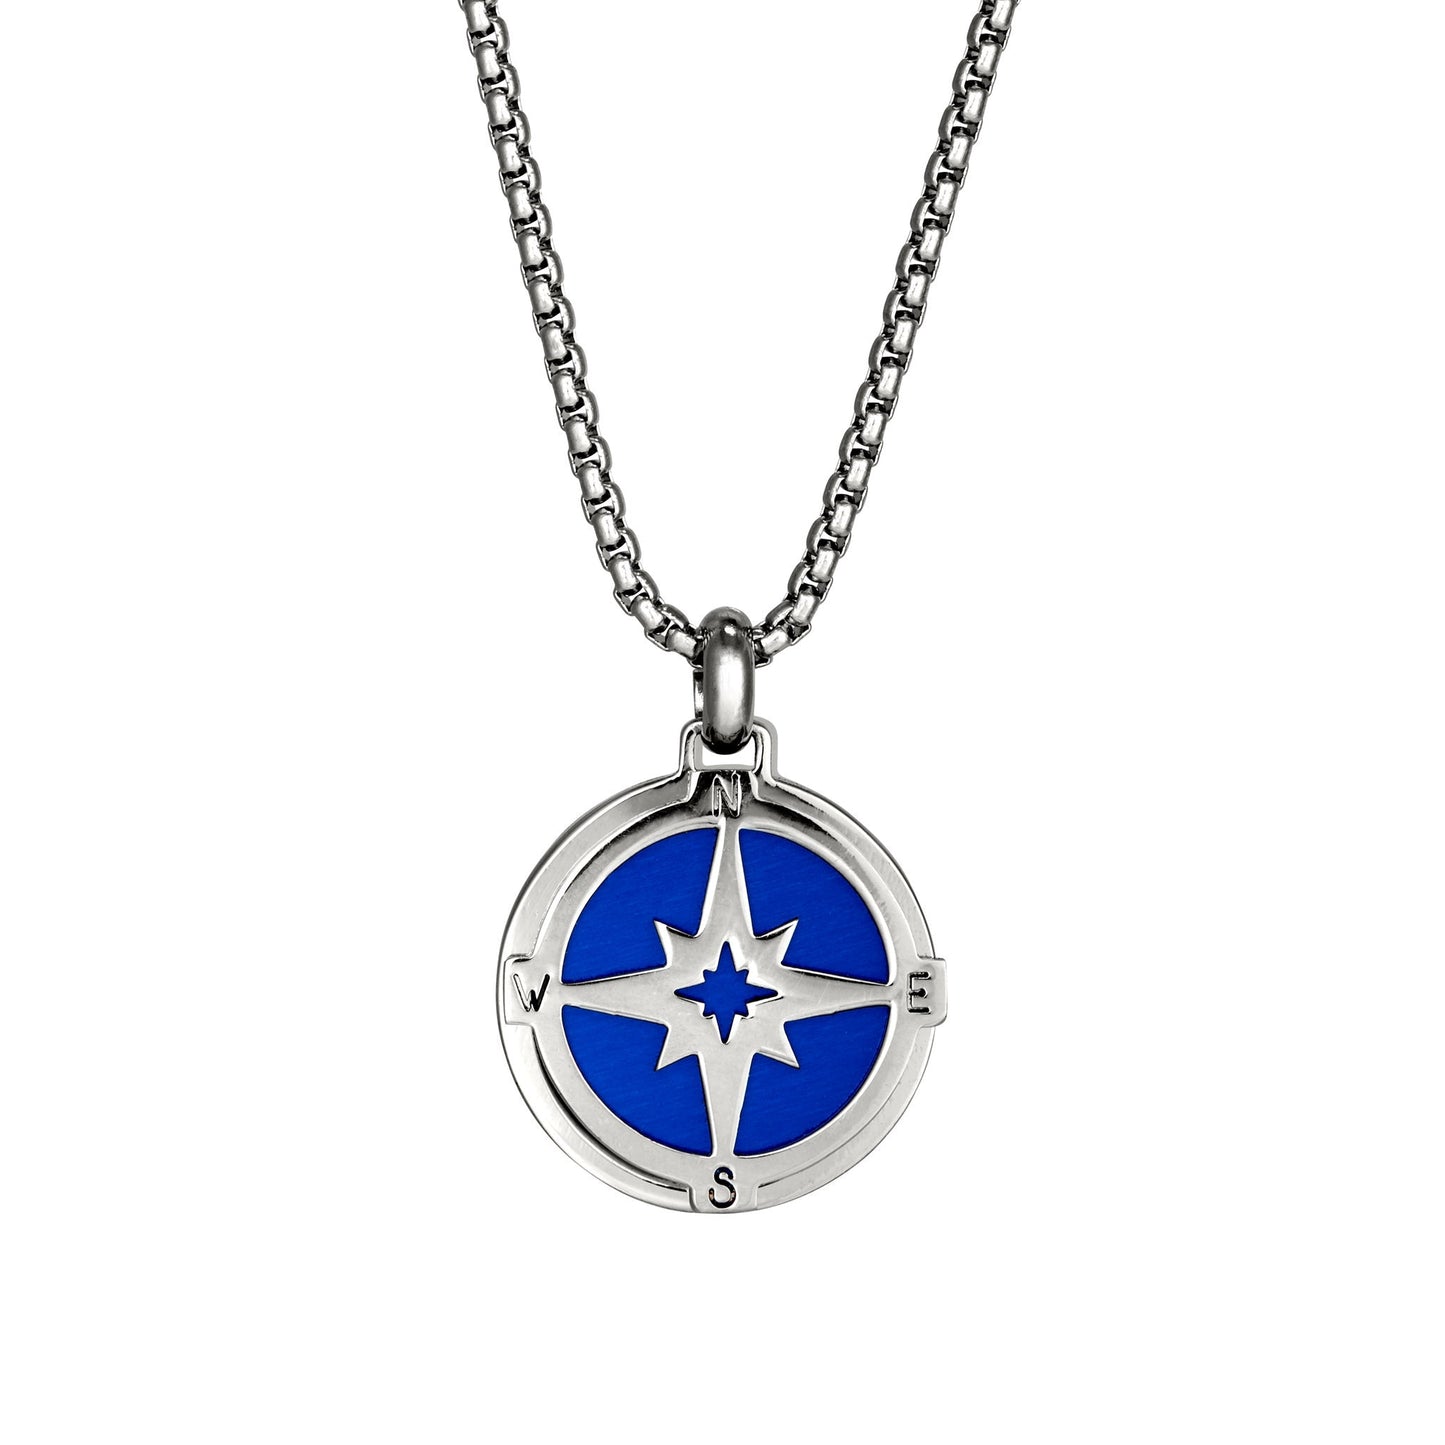 A blue & silver stainless steel nautical compass men's necklace displayed on a neutral white background.